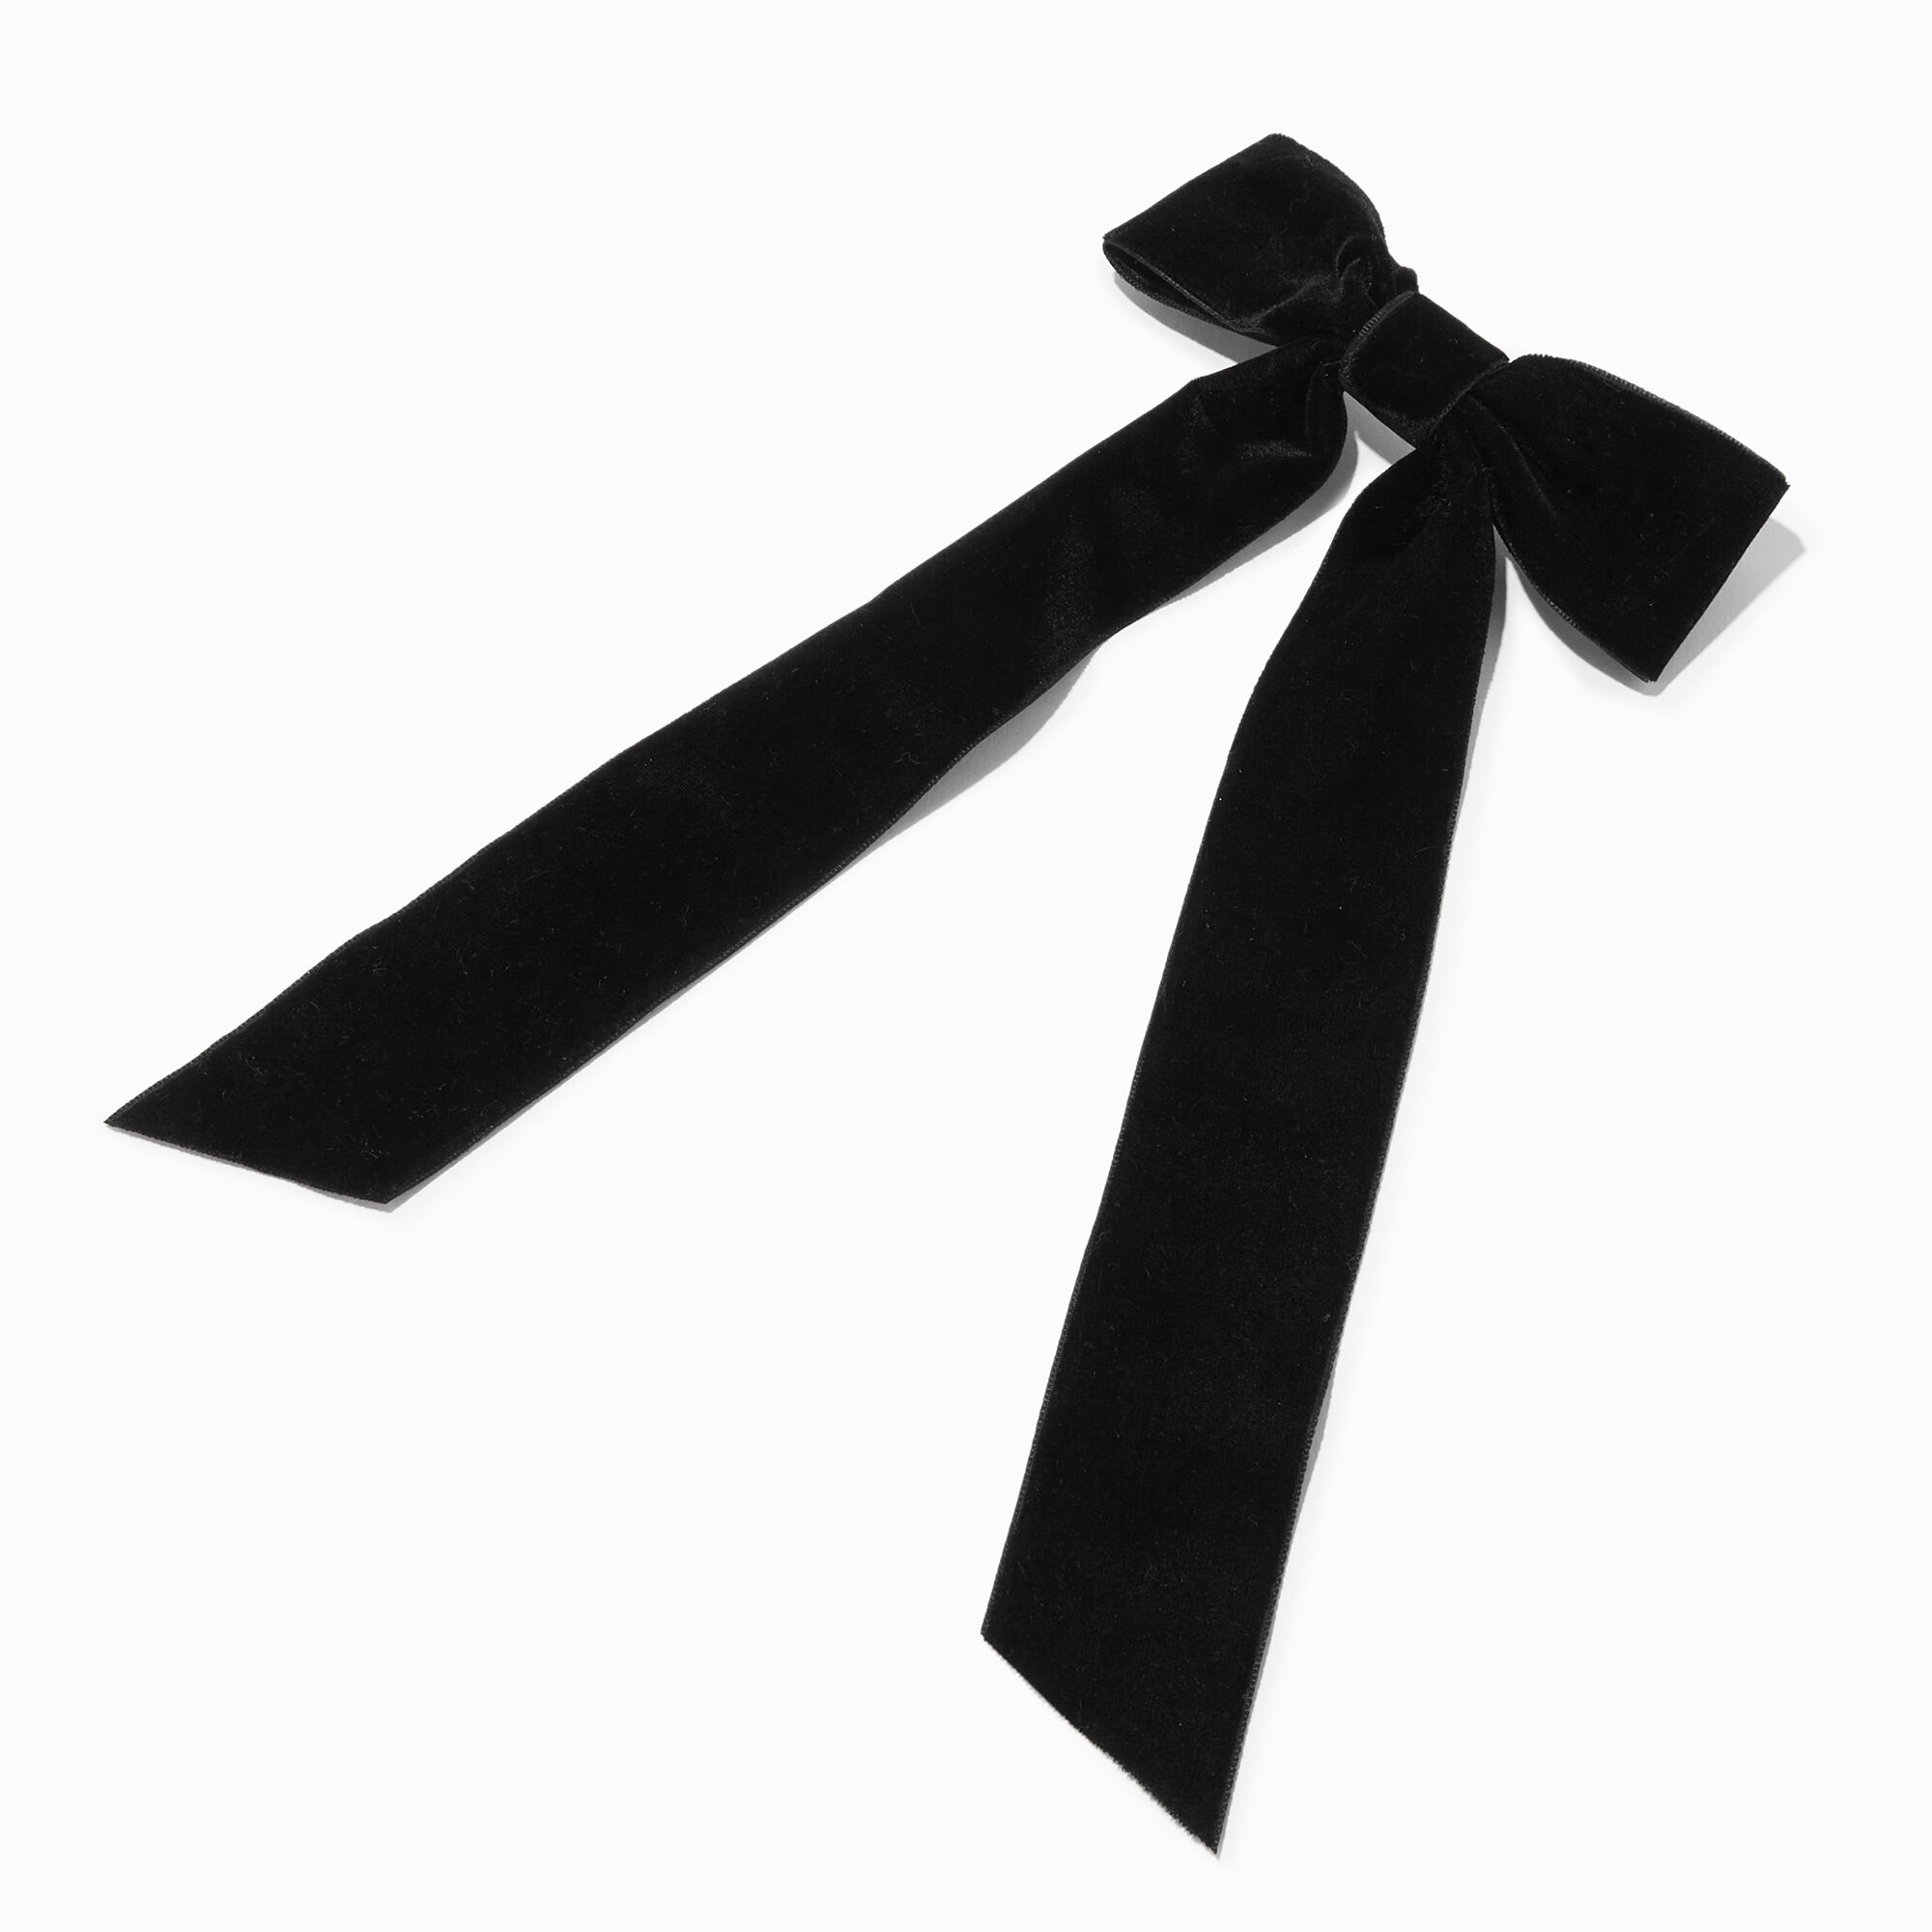 View Claires Velvet Long Tail Hair Bow Clip Black information